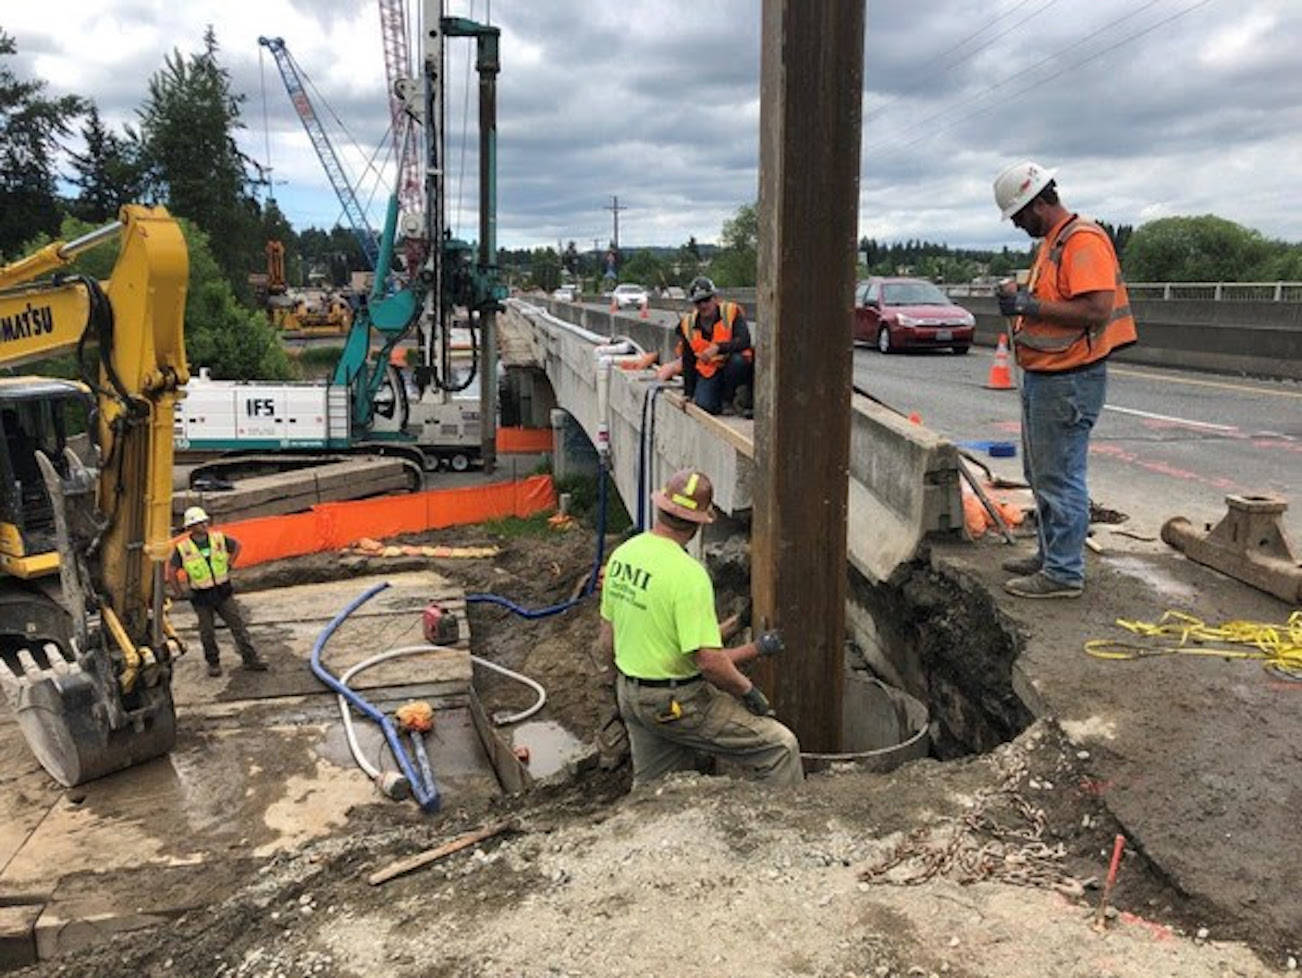 A look at construction work. Photo courtesy city of Kenmore